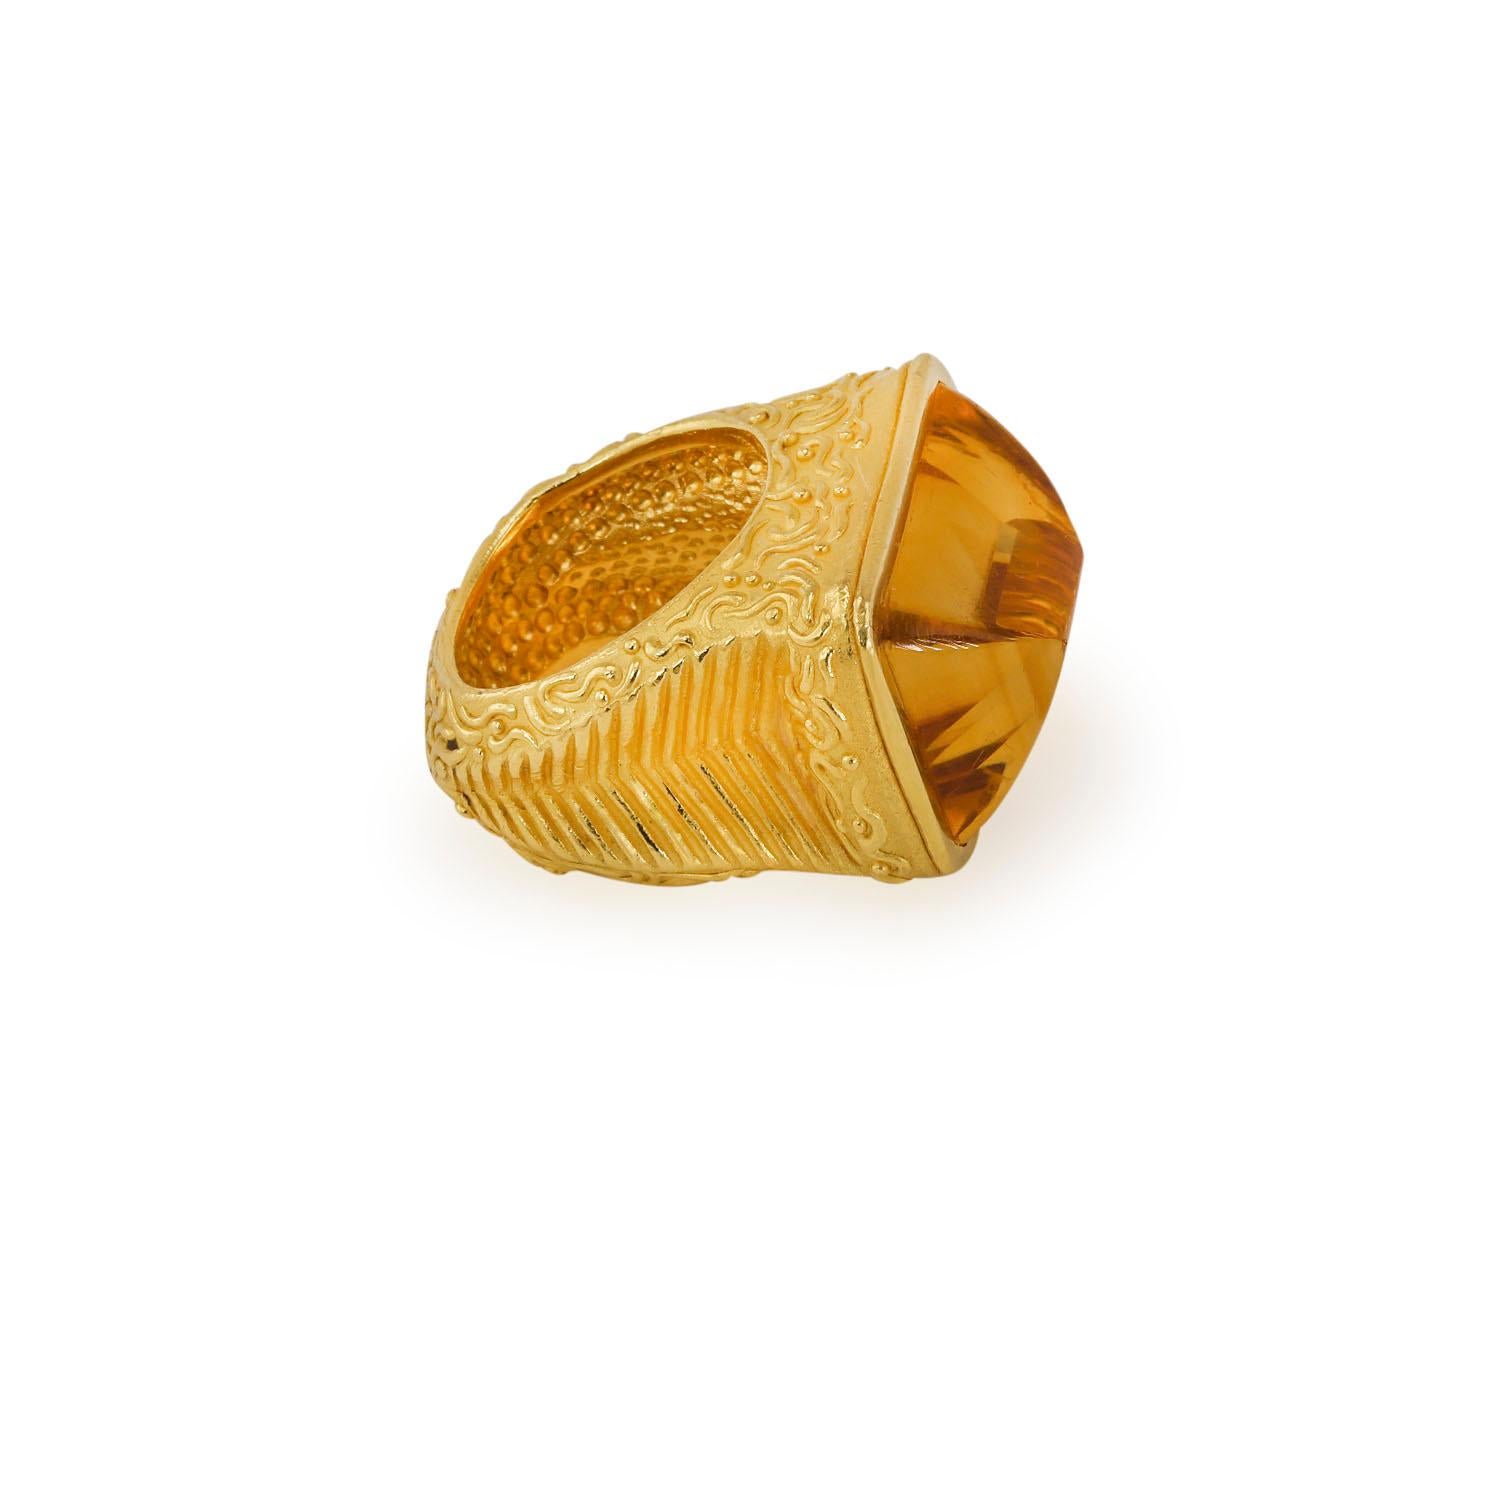 22K yellow gold
Citrine (22.00 ctw.)
Size 8.5
50.4 grams
Gemstone weight is approximate